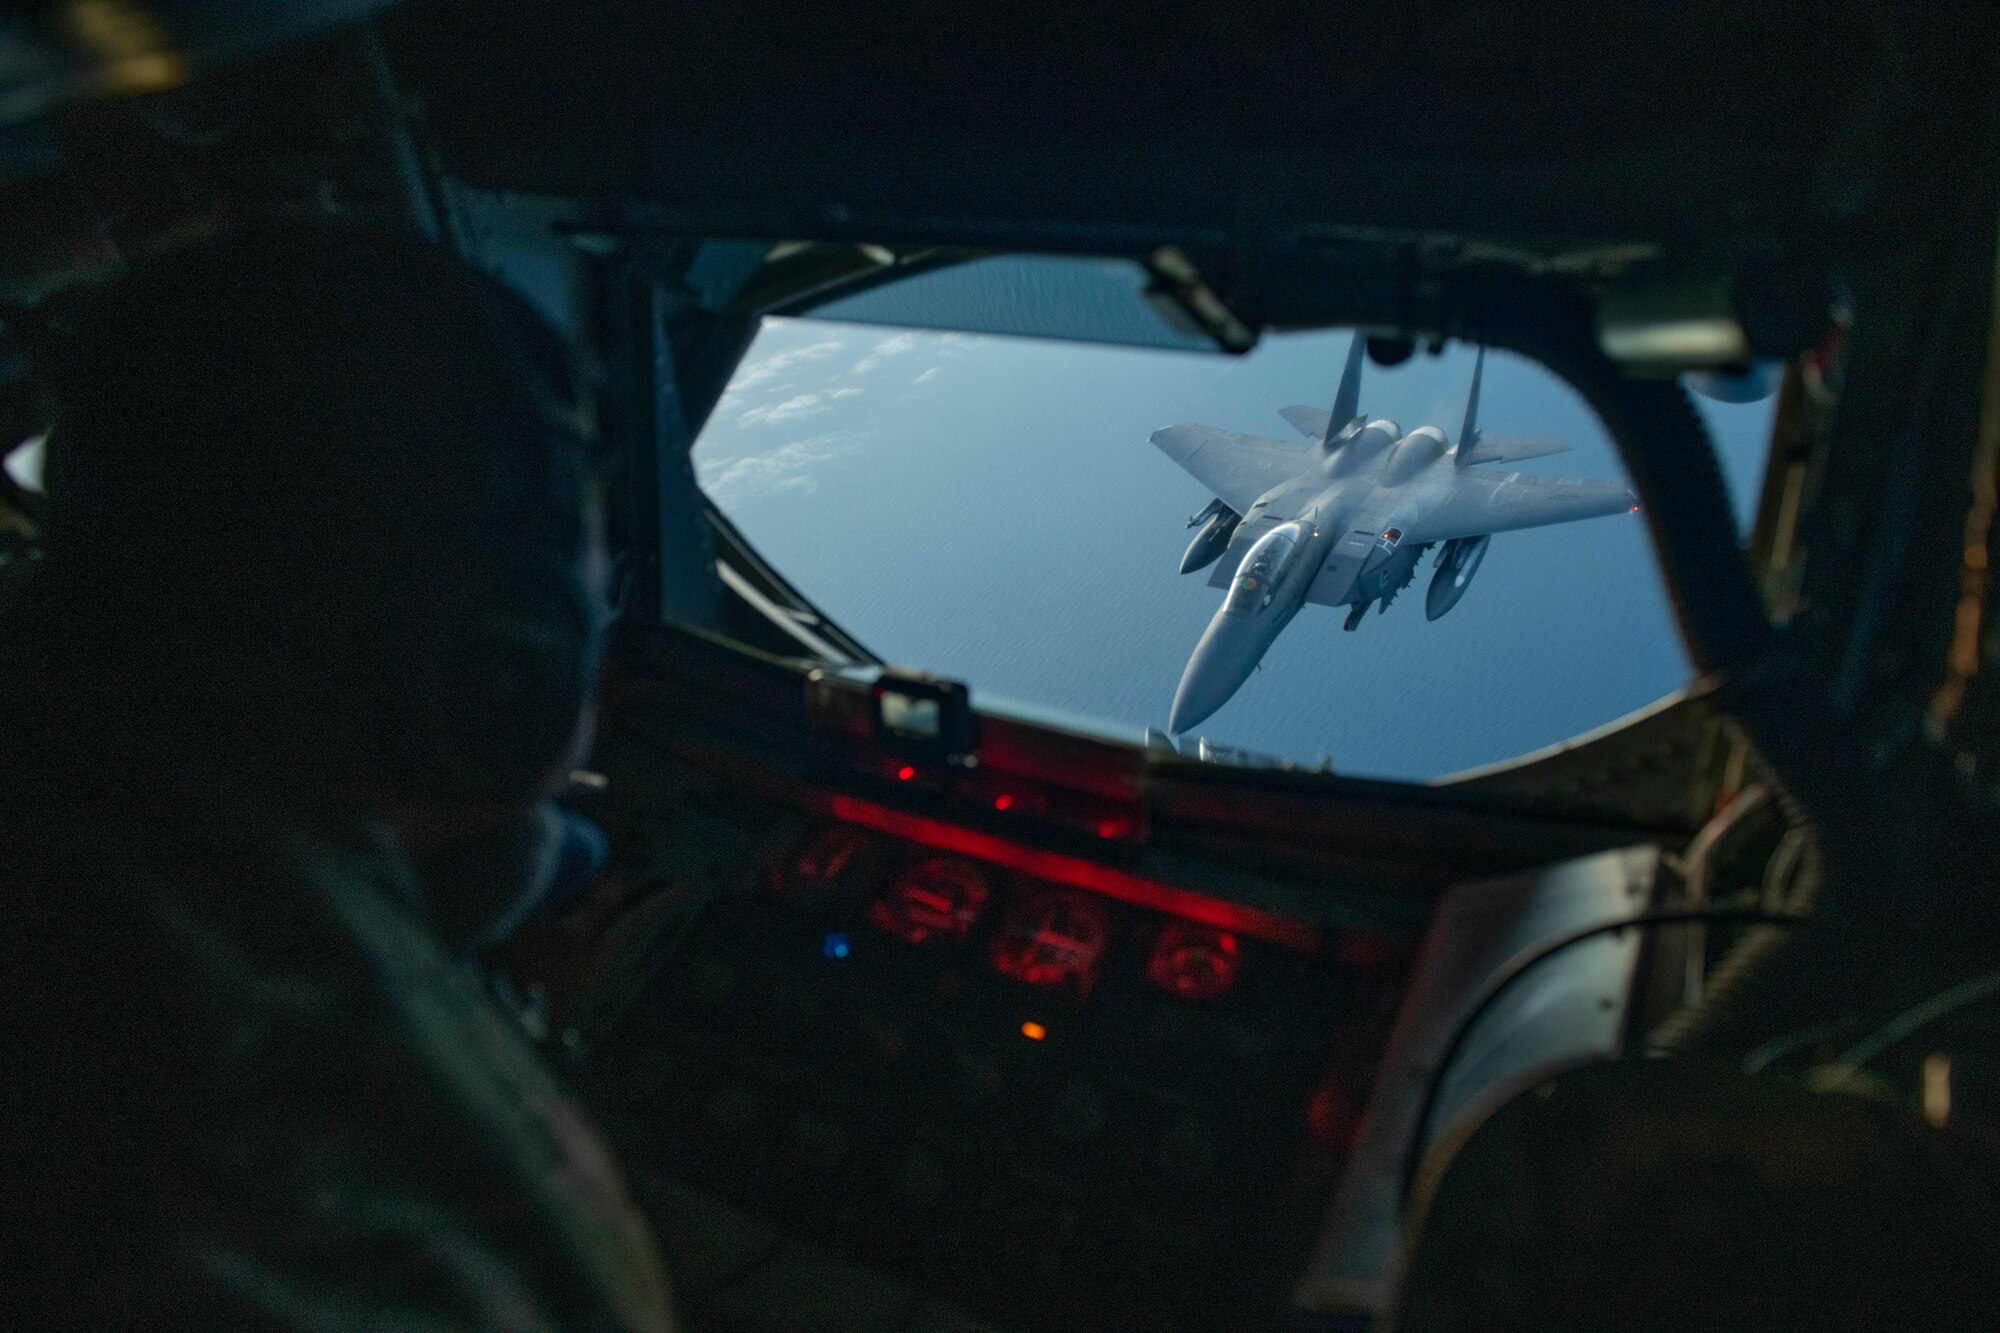 U.S. Air Force Tech. Sgt. Christian Villanueva, 351st Air Refueling Squadron boom operator, refuels an F-15E Strike Eagle assigned to the 48th Fighter Wing at RAF Lakenheath, England during the “FURIOUS 48” readiness exercise over the skies of England, April 24, 2019. The exercise was designed to emphasize the importance of combat skills effectiveness training and test 100th ARW and 48th FW Airmen on their ability to survive and operate in wartime conditions. (U.S. Air Force photo by Senior Airman Luke Milano)